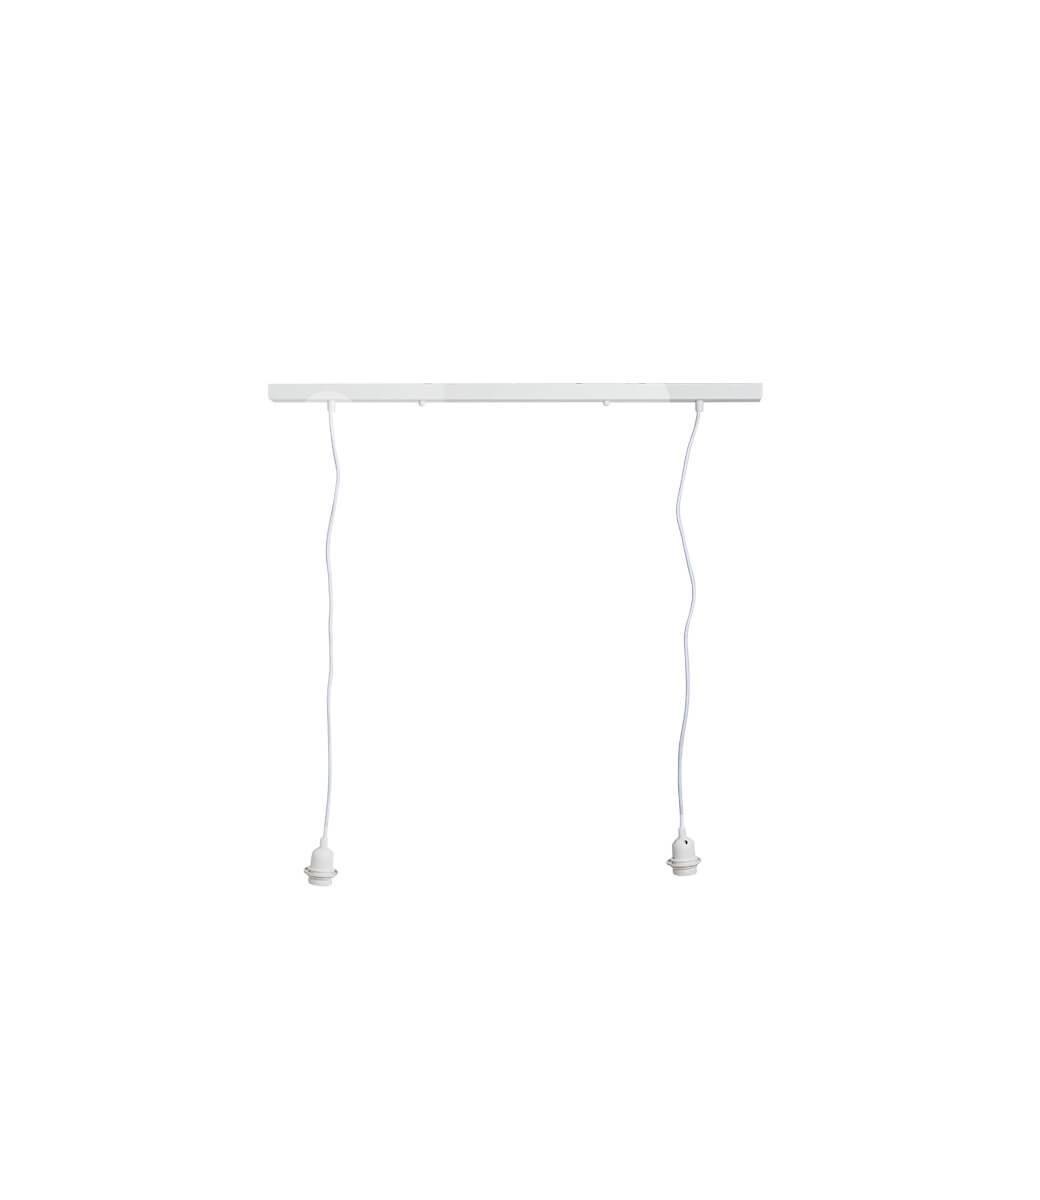 Two in line - Support pour 2 luminaires Cotton Ball Lights 